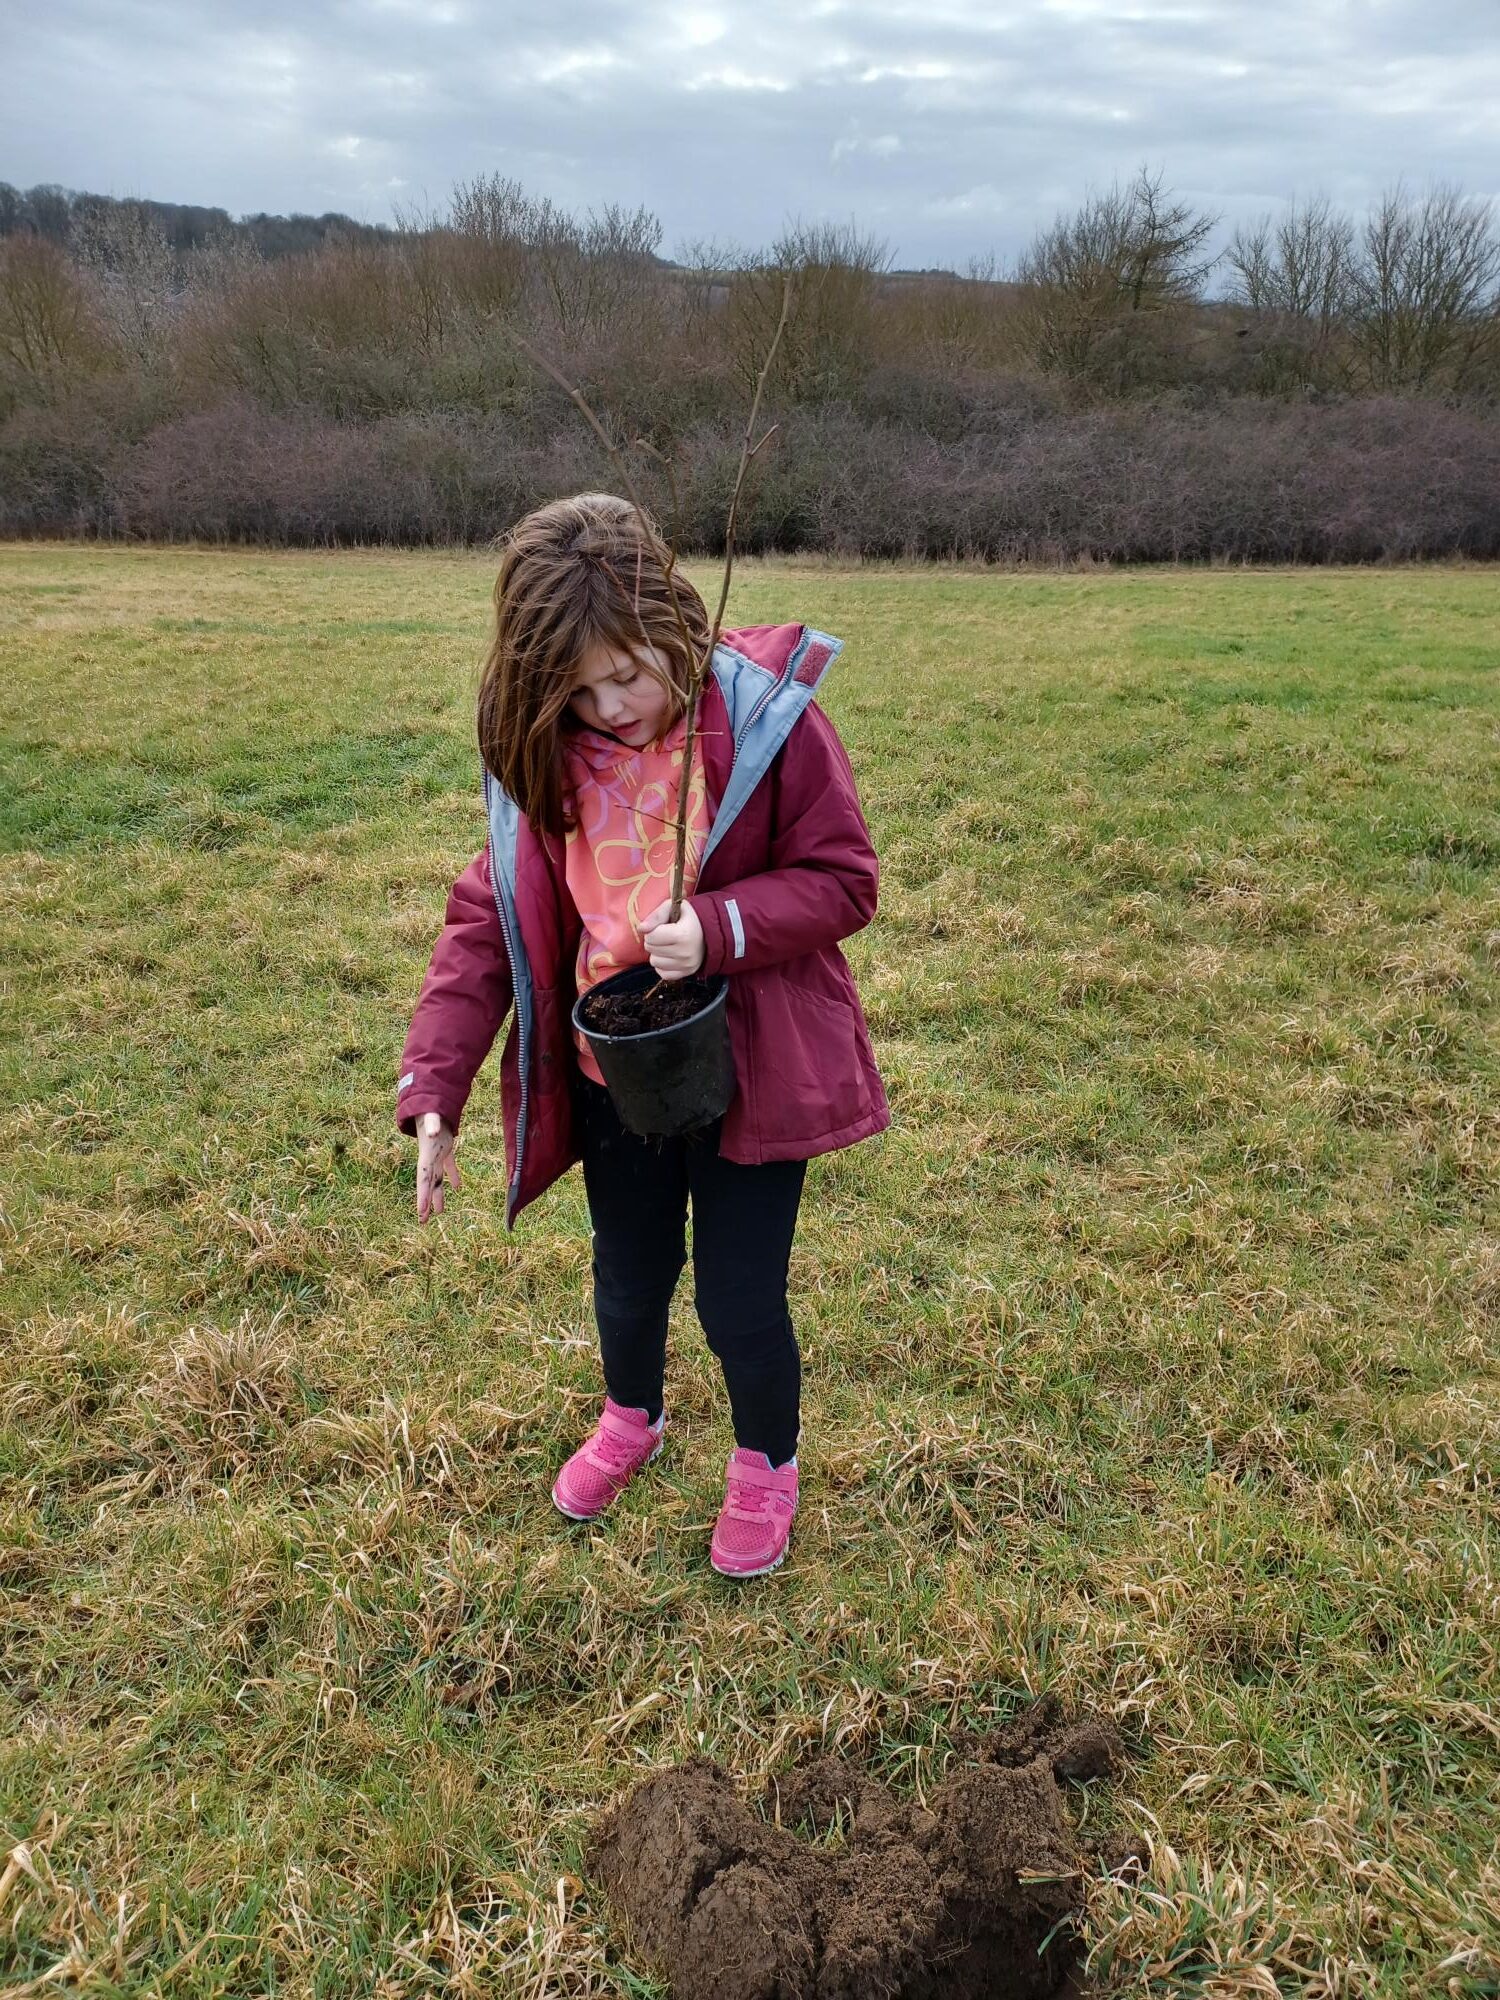 A child enjoying the community planting event on 25 February 2023 at Queen Elizabeth II Community Woodland in Dinnington, Rotherham